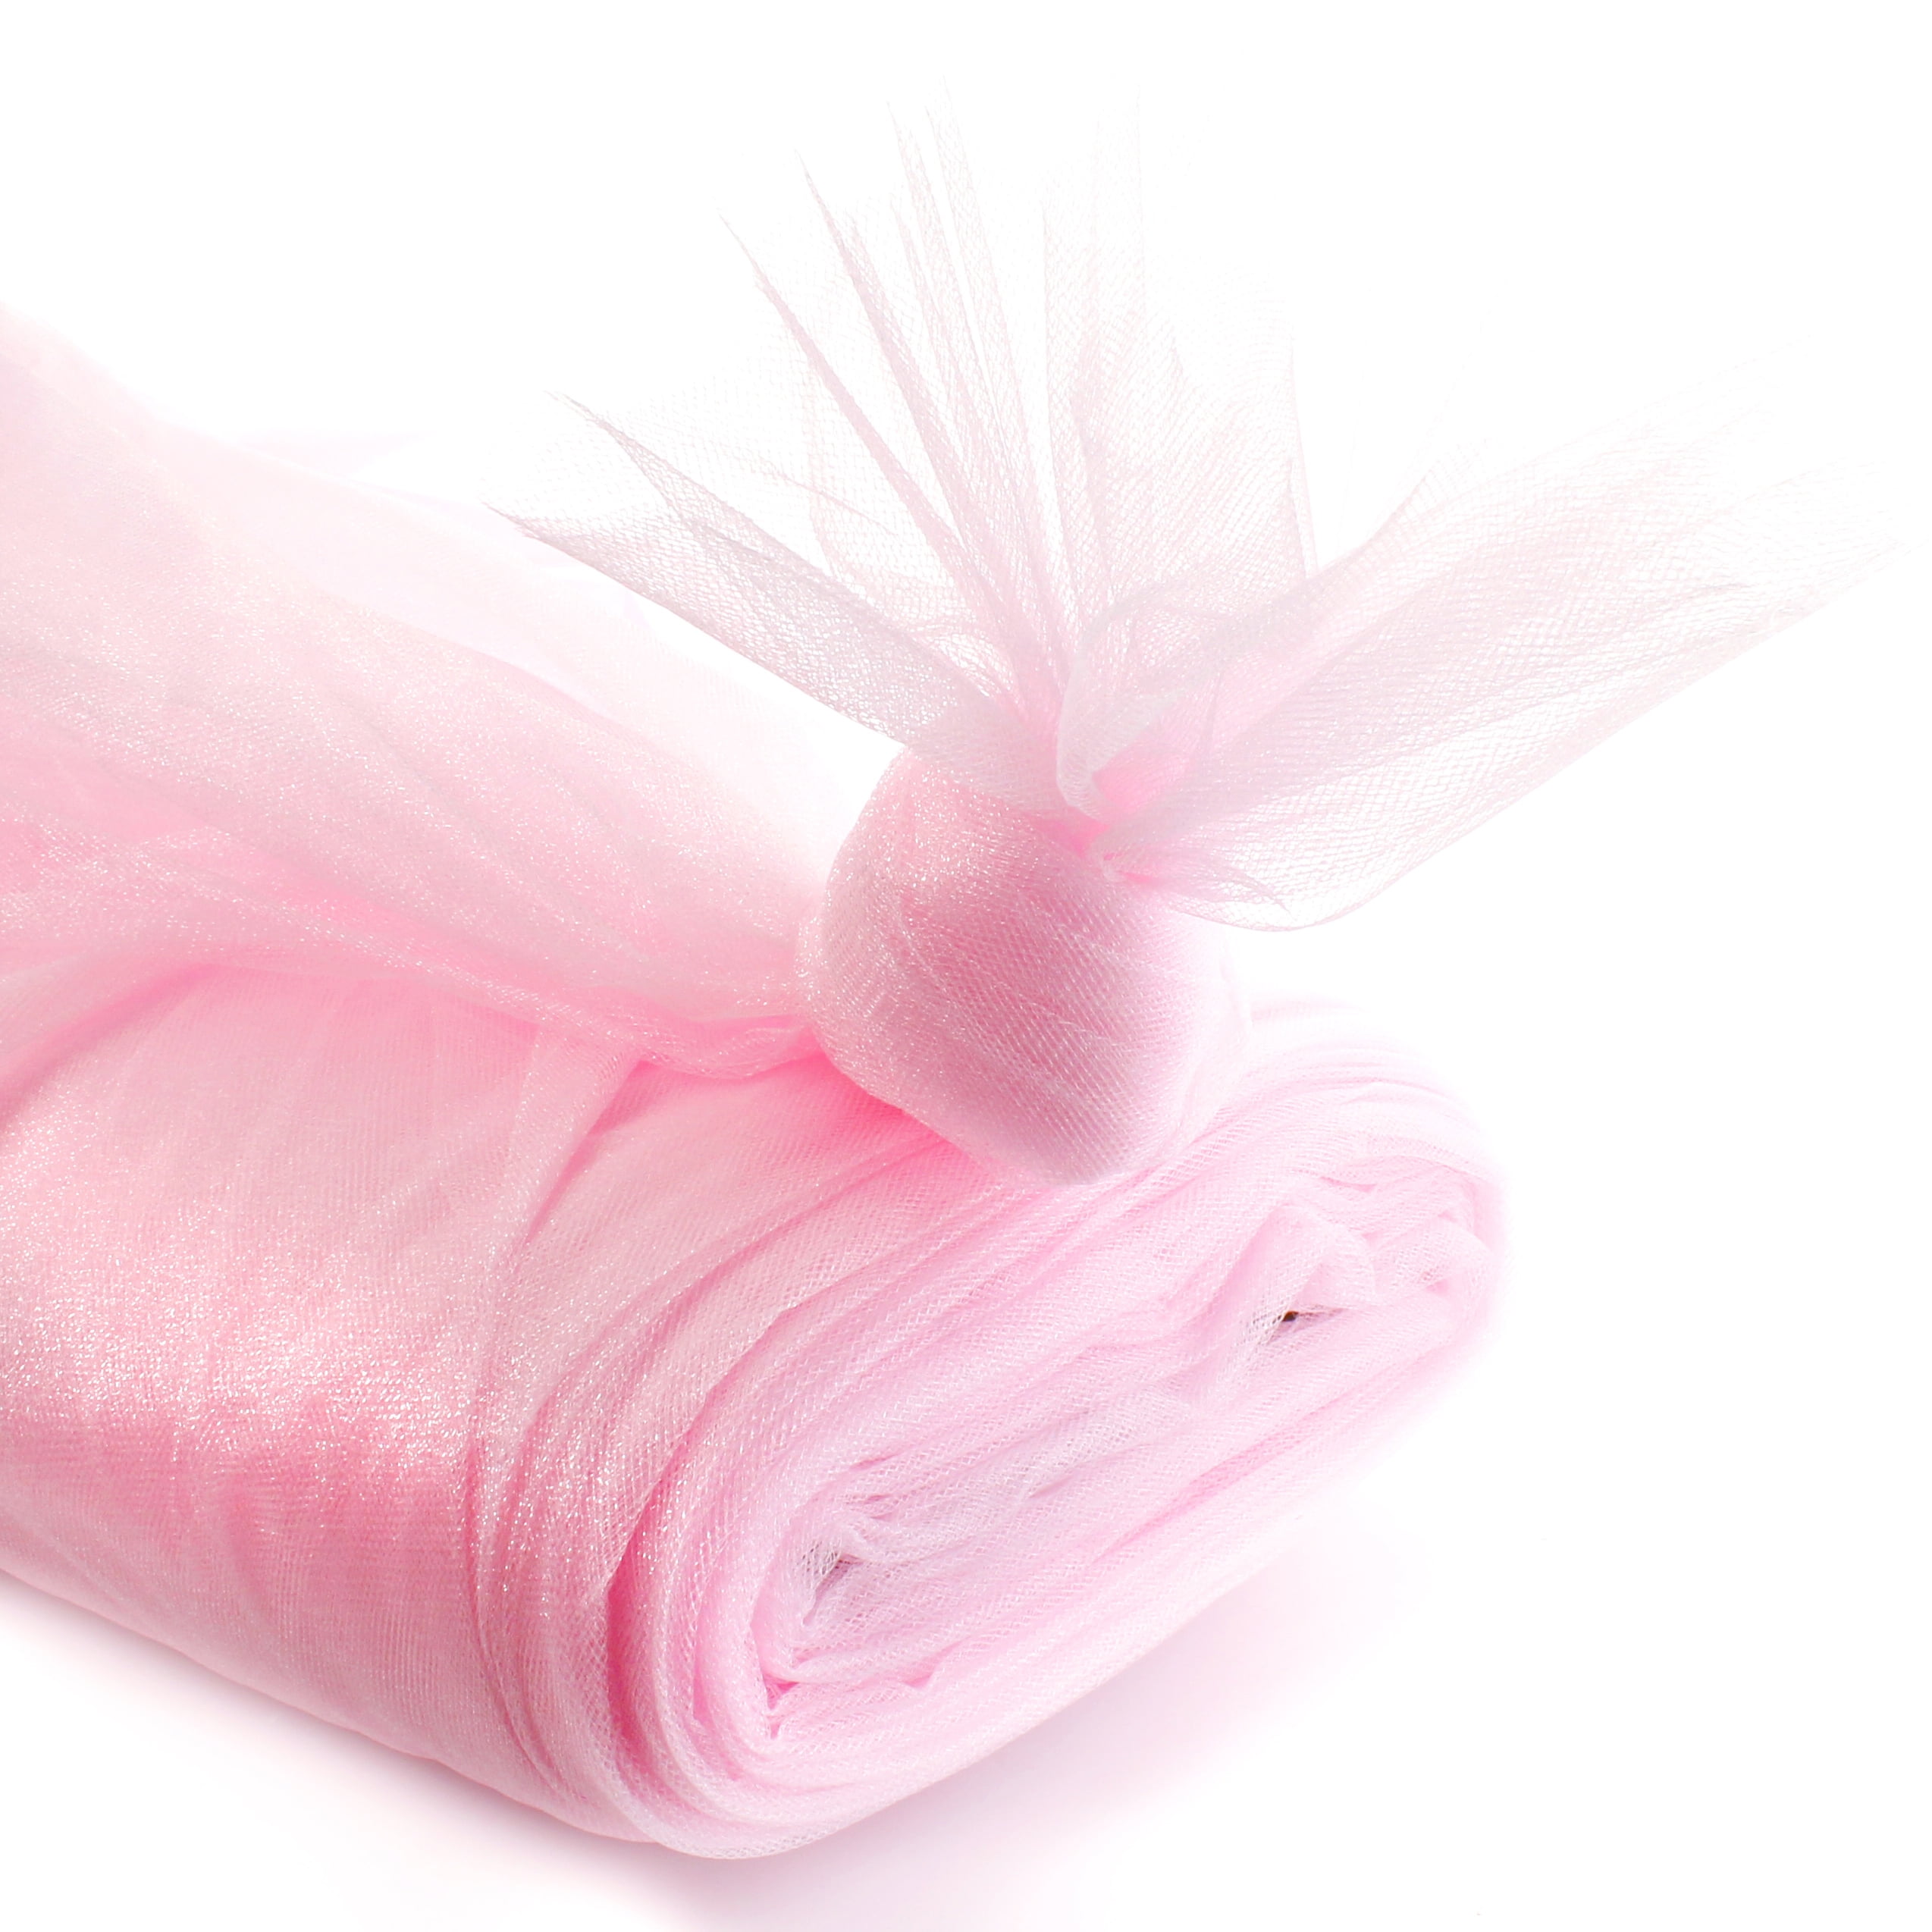 Tulle Fabric Rolls 6Inch by 25 Yards Tutu Skirts Wedding Baby Shower Table  Skirt